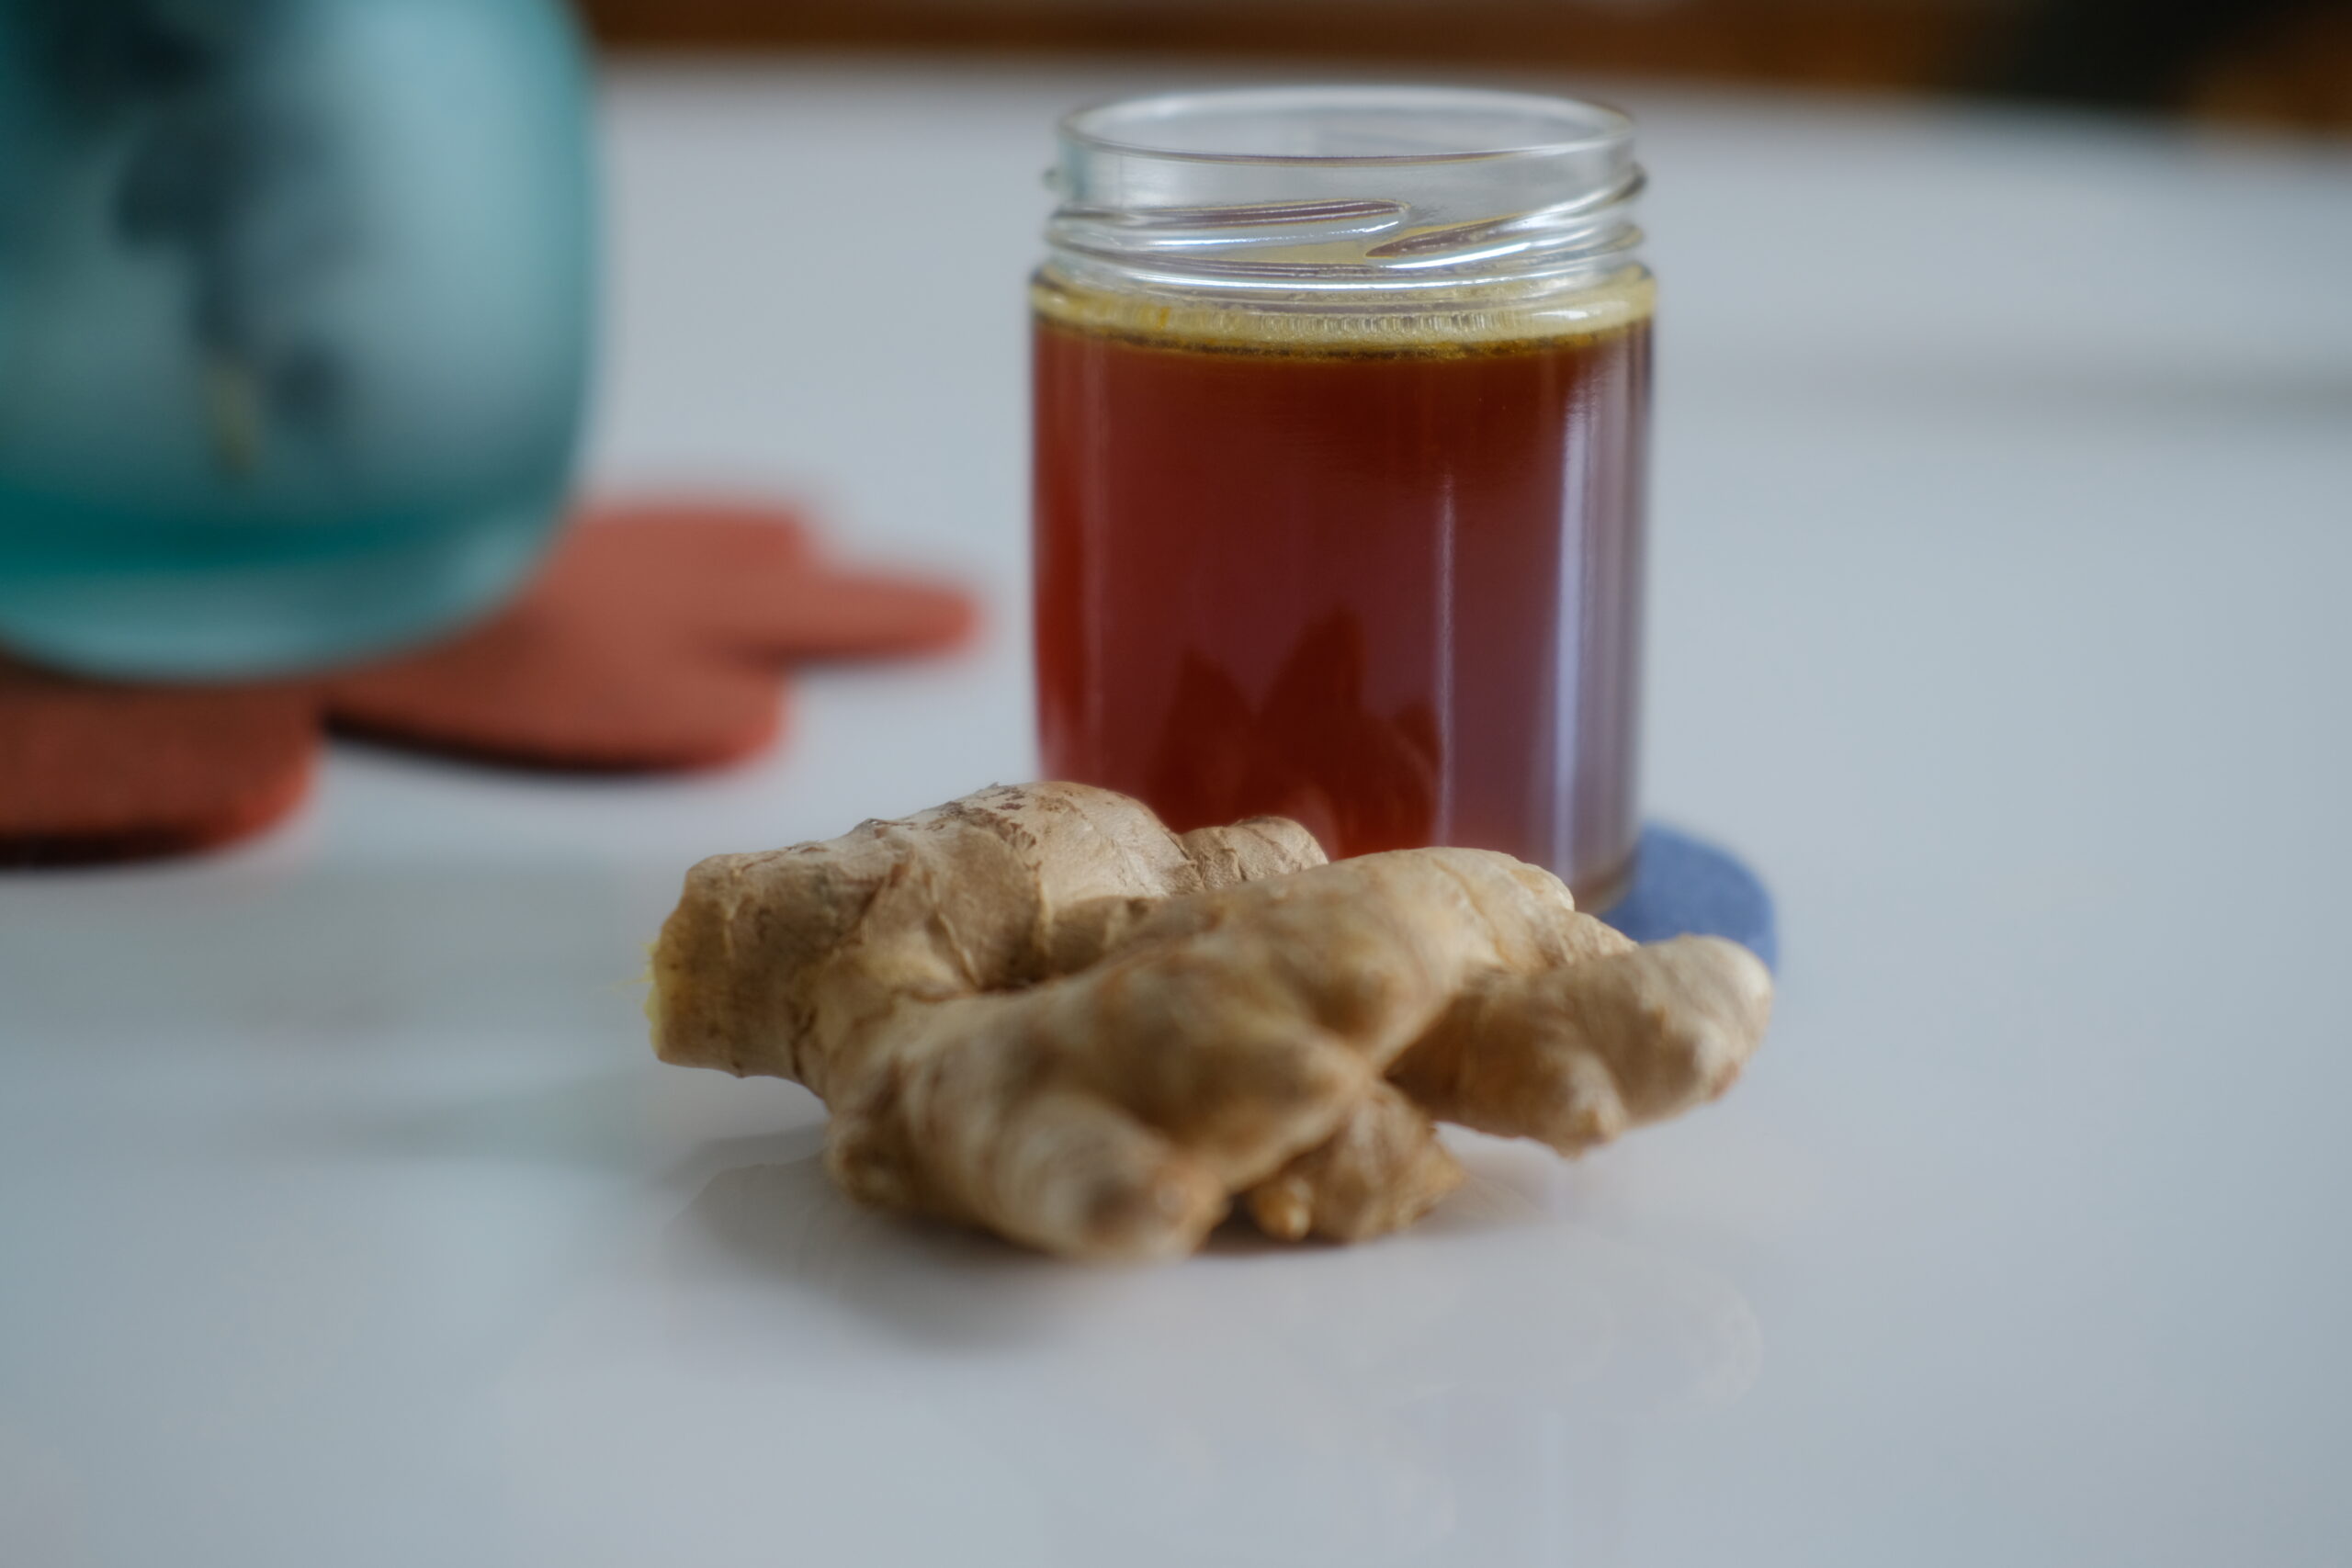 If you like your meals with a little extra kick, then you need to drizzle this Ginger Infused Honey on top.